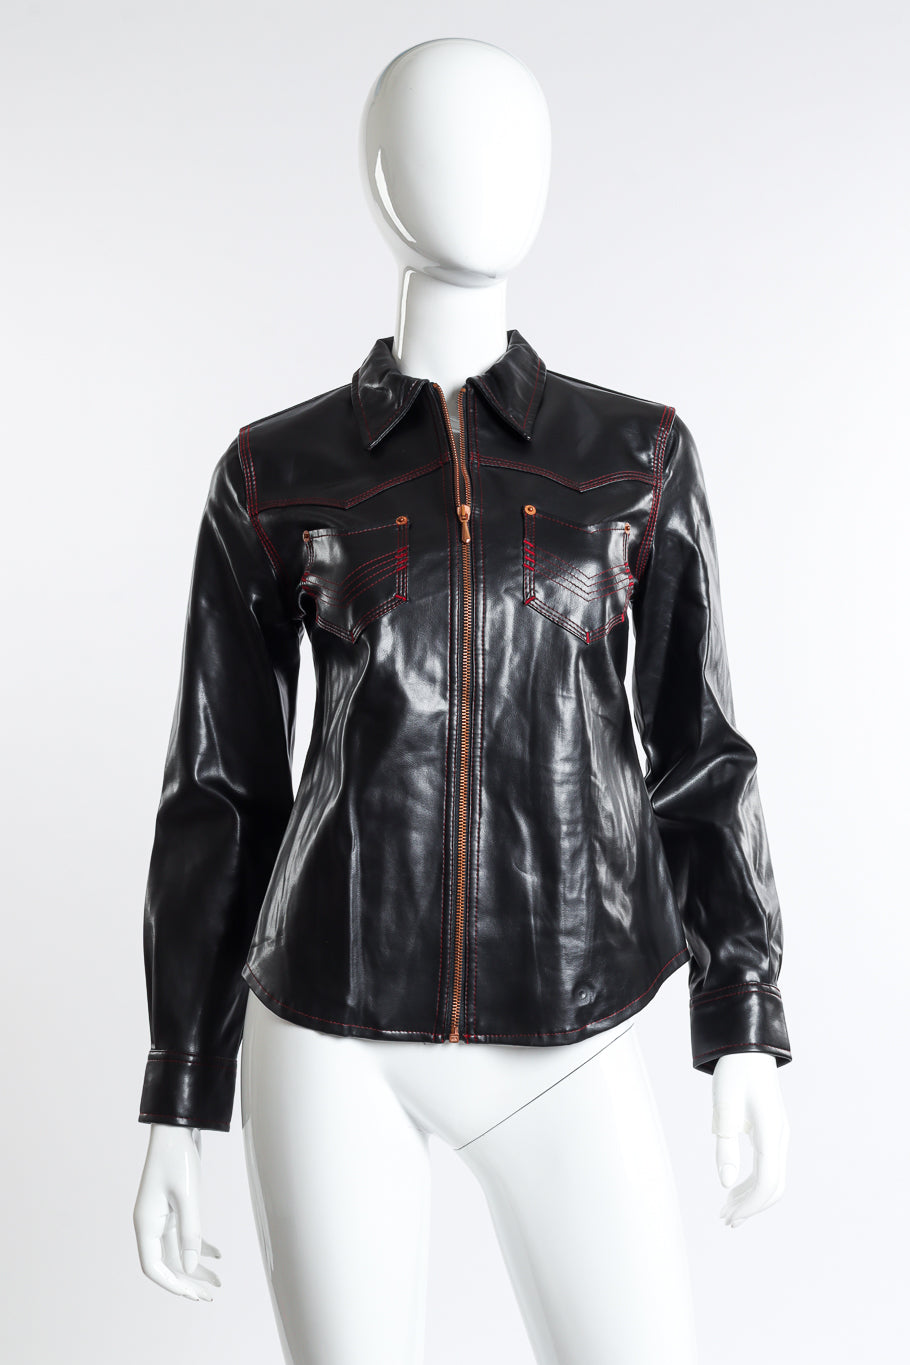 Vintage Jean Paul Gaultier Jeans PVC Western style jacket with maroon stitching as worn closed on mannequin @Recess LA